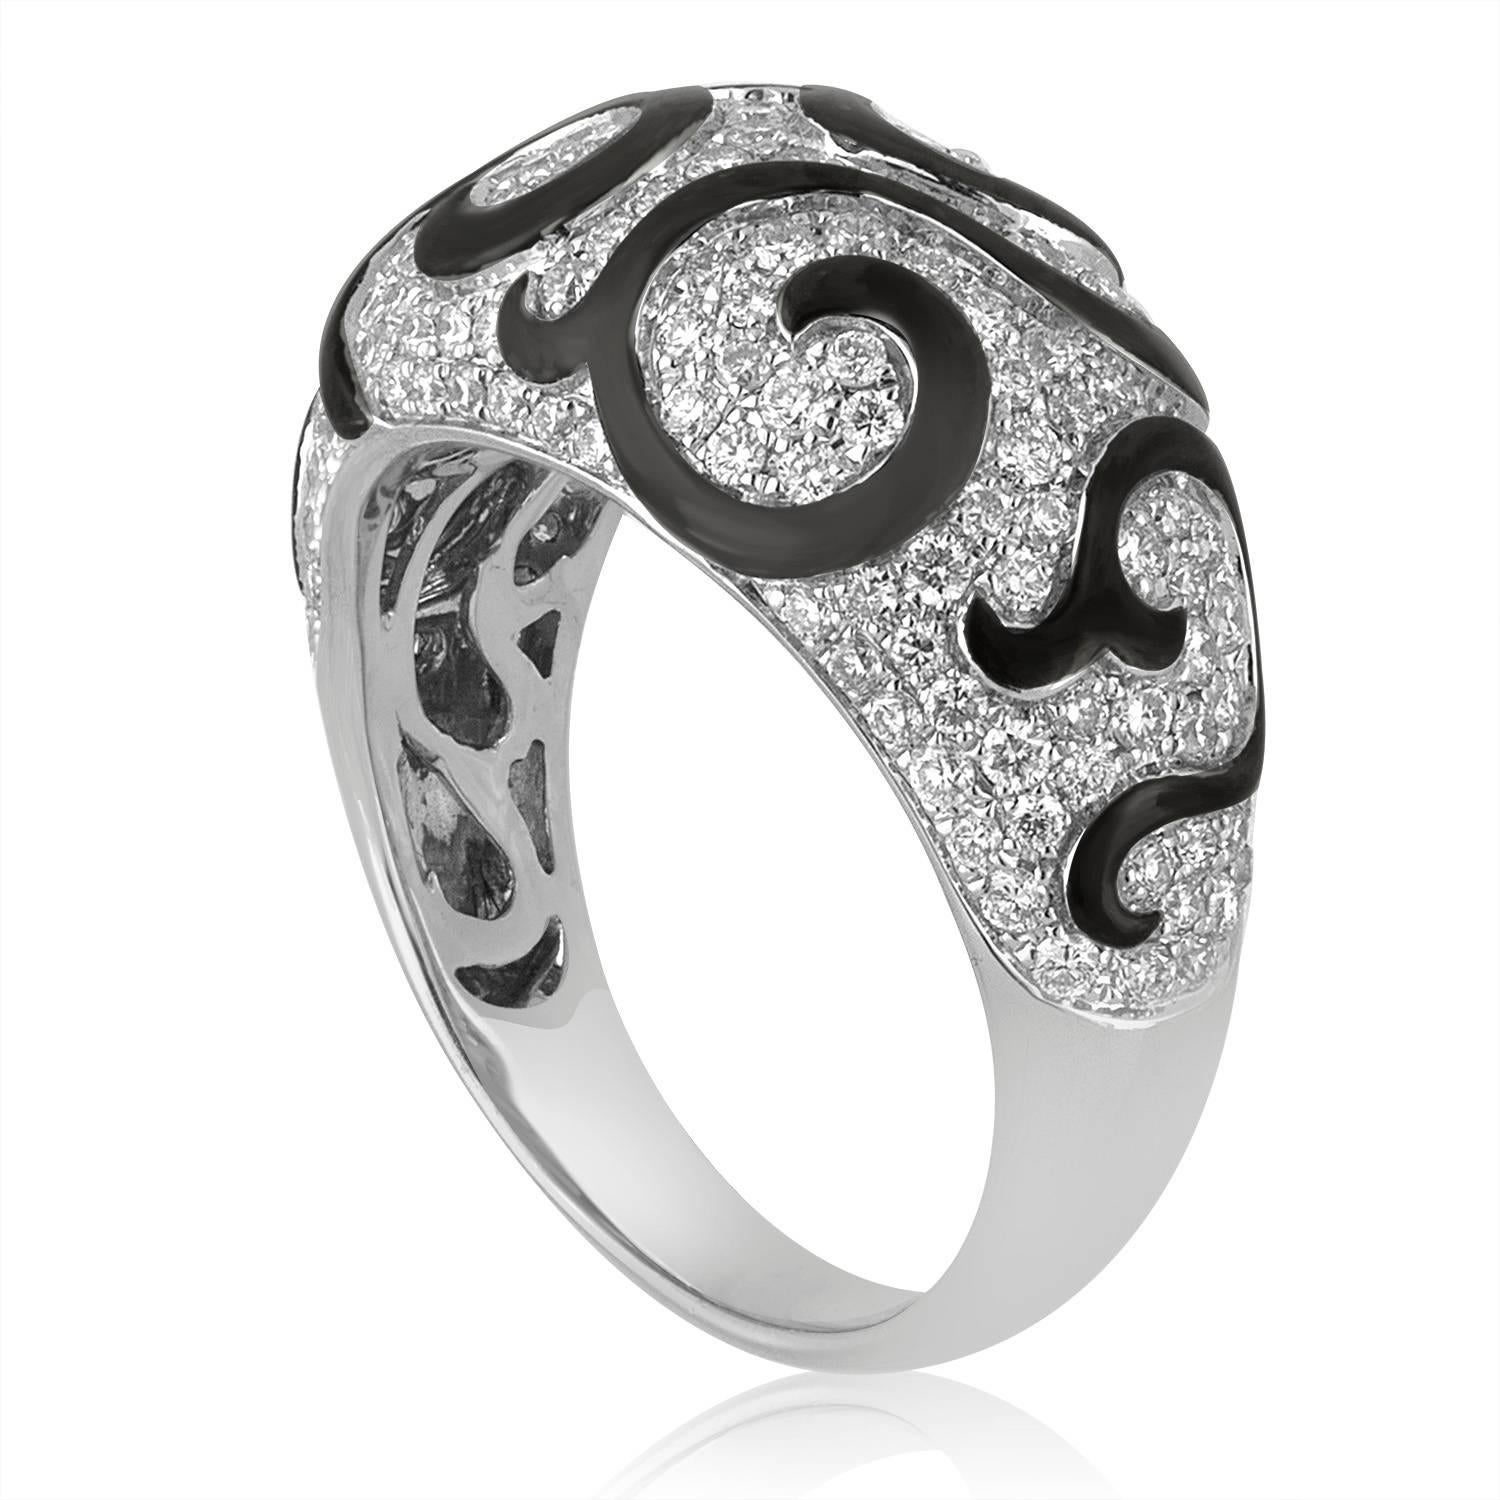 Very Beautiful Modern Dome Cocktail Ring
The ring is 18K White Gold
The ring has 1.15 Carat in Diamonds F/G VS.
The ring has beautiful black enamel swirls.
The ring is a size 7, sizable.
The ring weighs 6.8 grams.